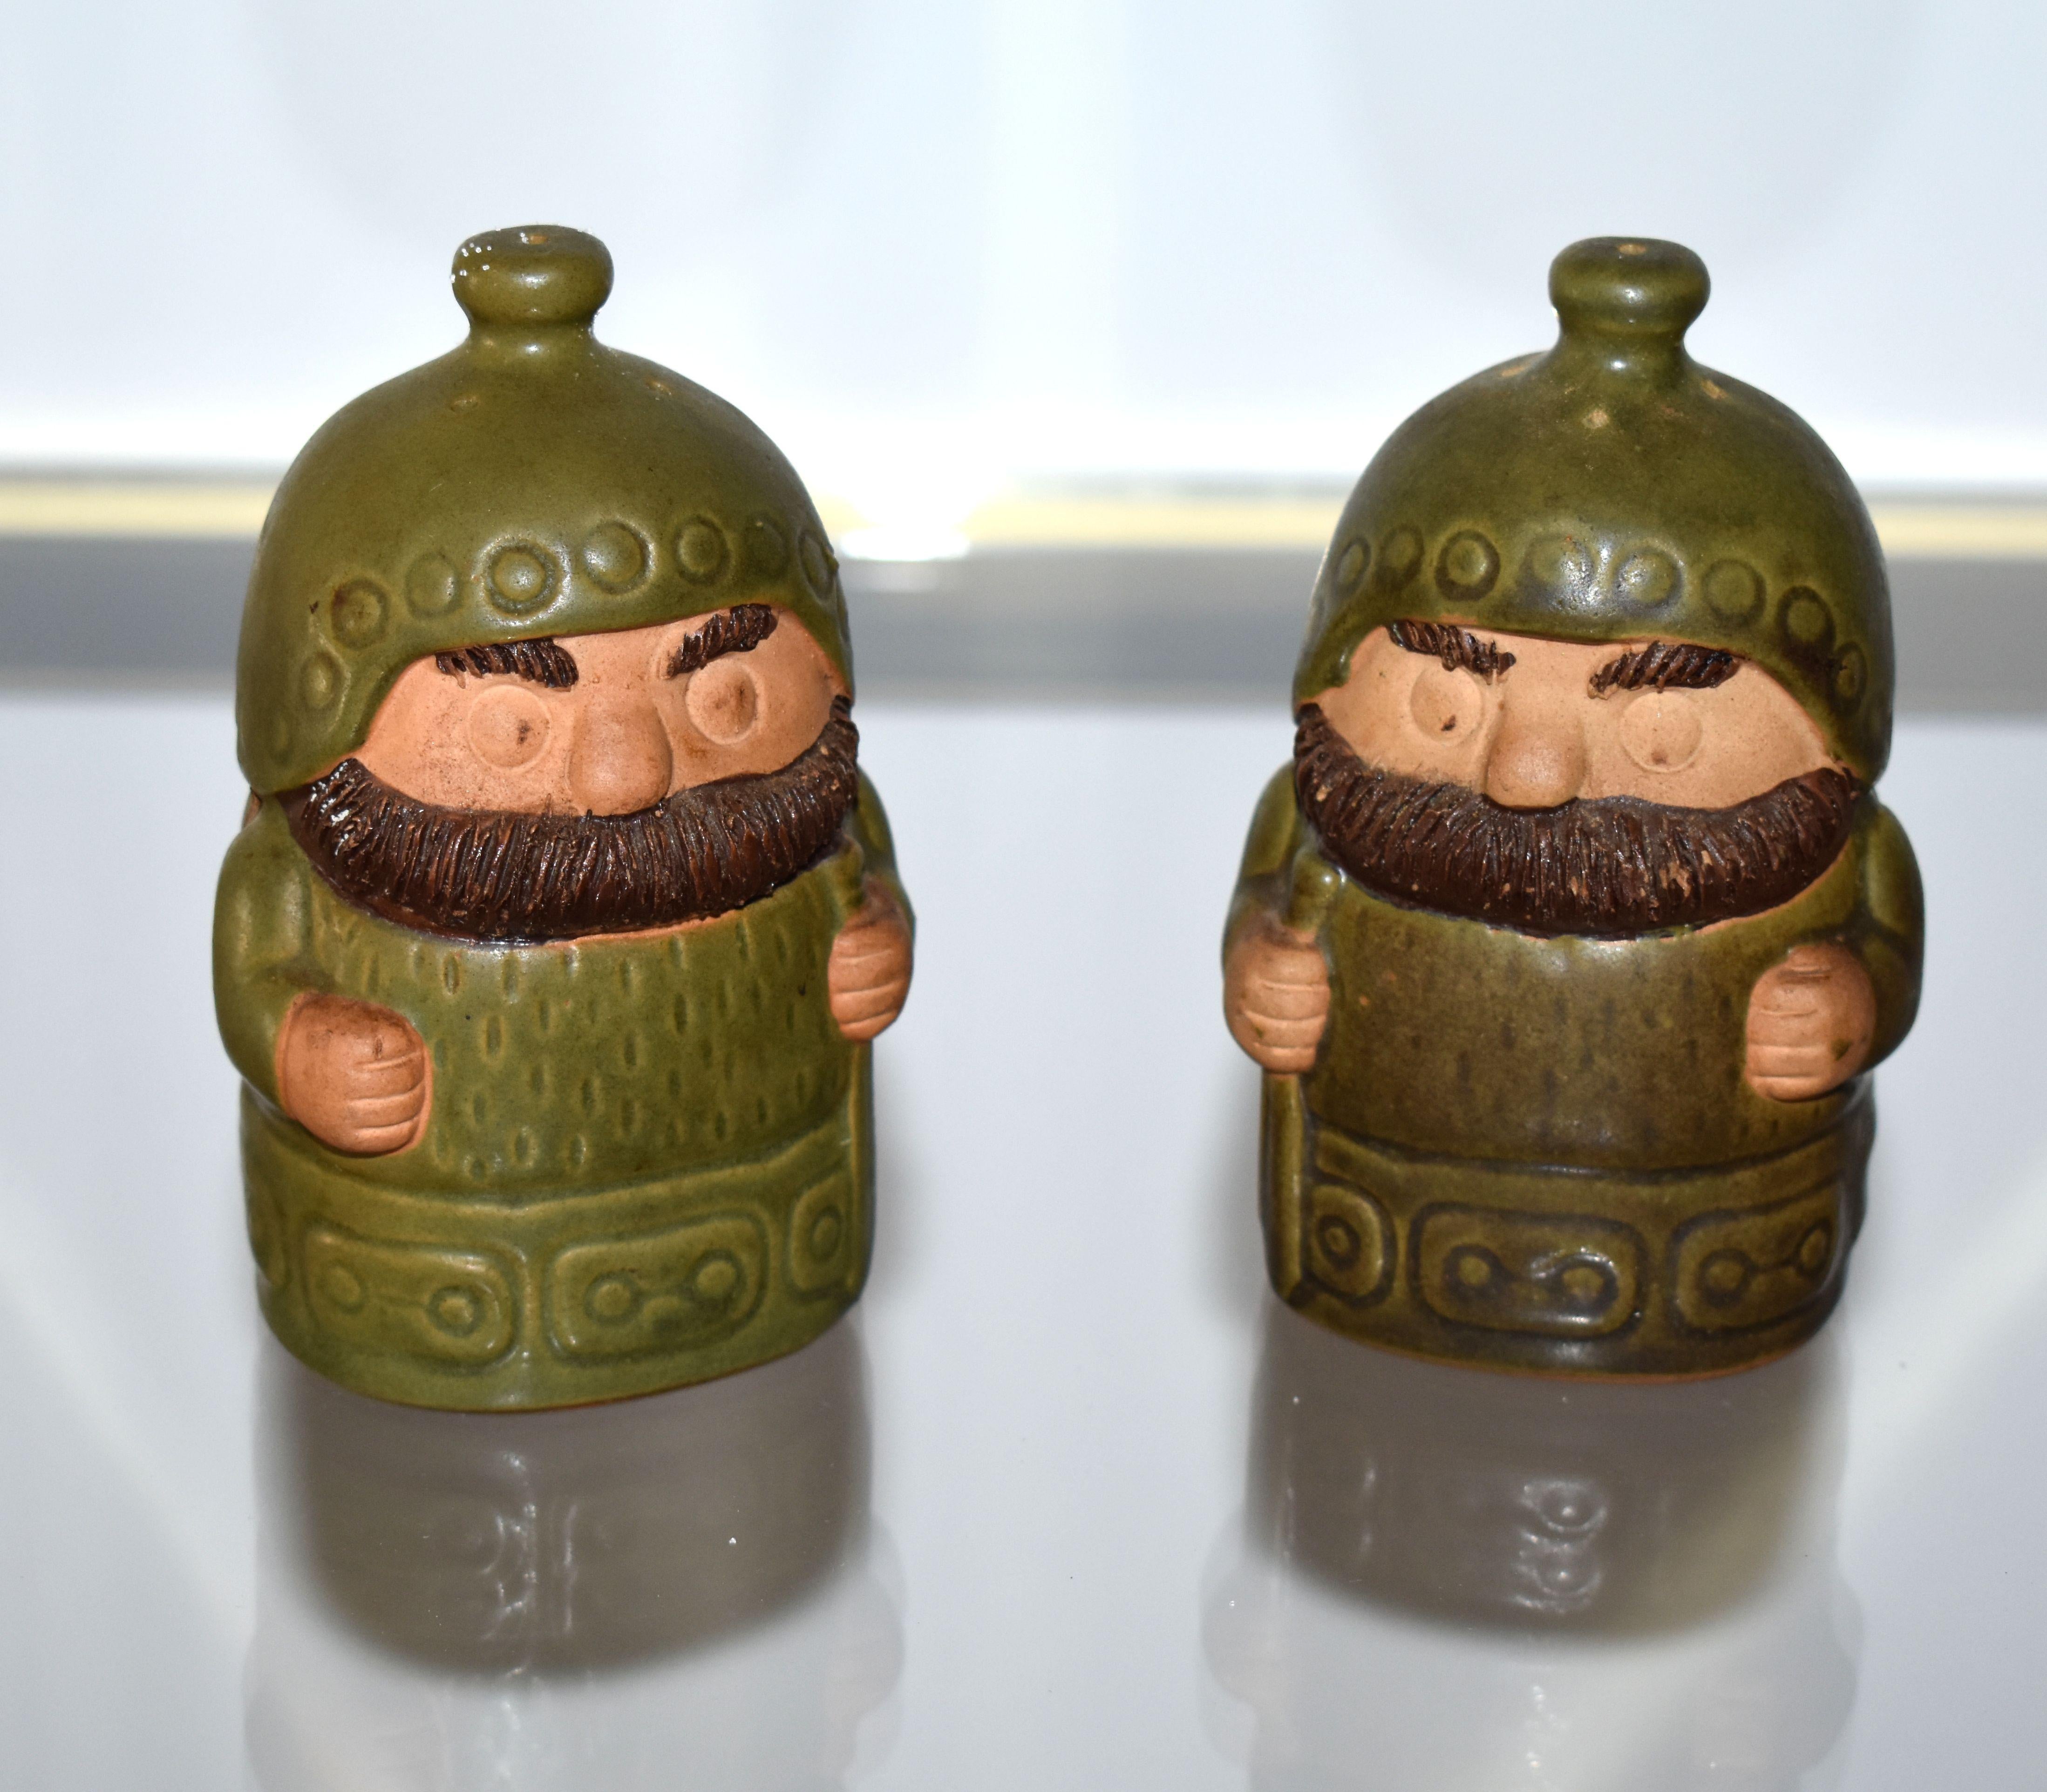 Set of salt and pepper hand painted on terracotta trolls knight figurines.